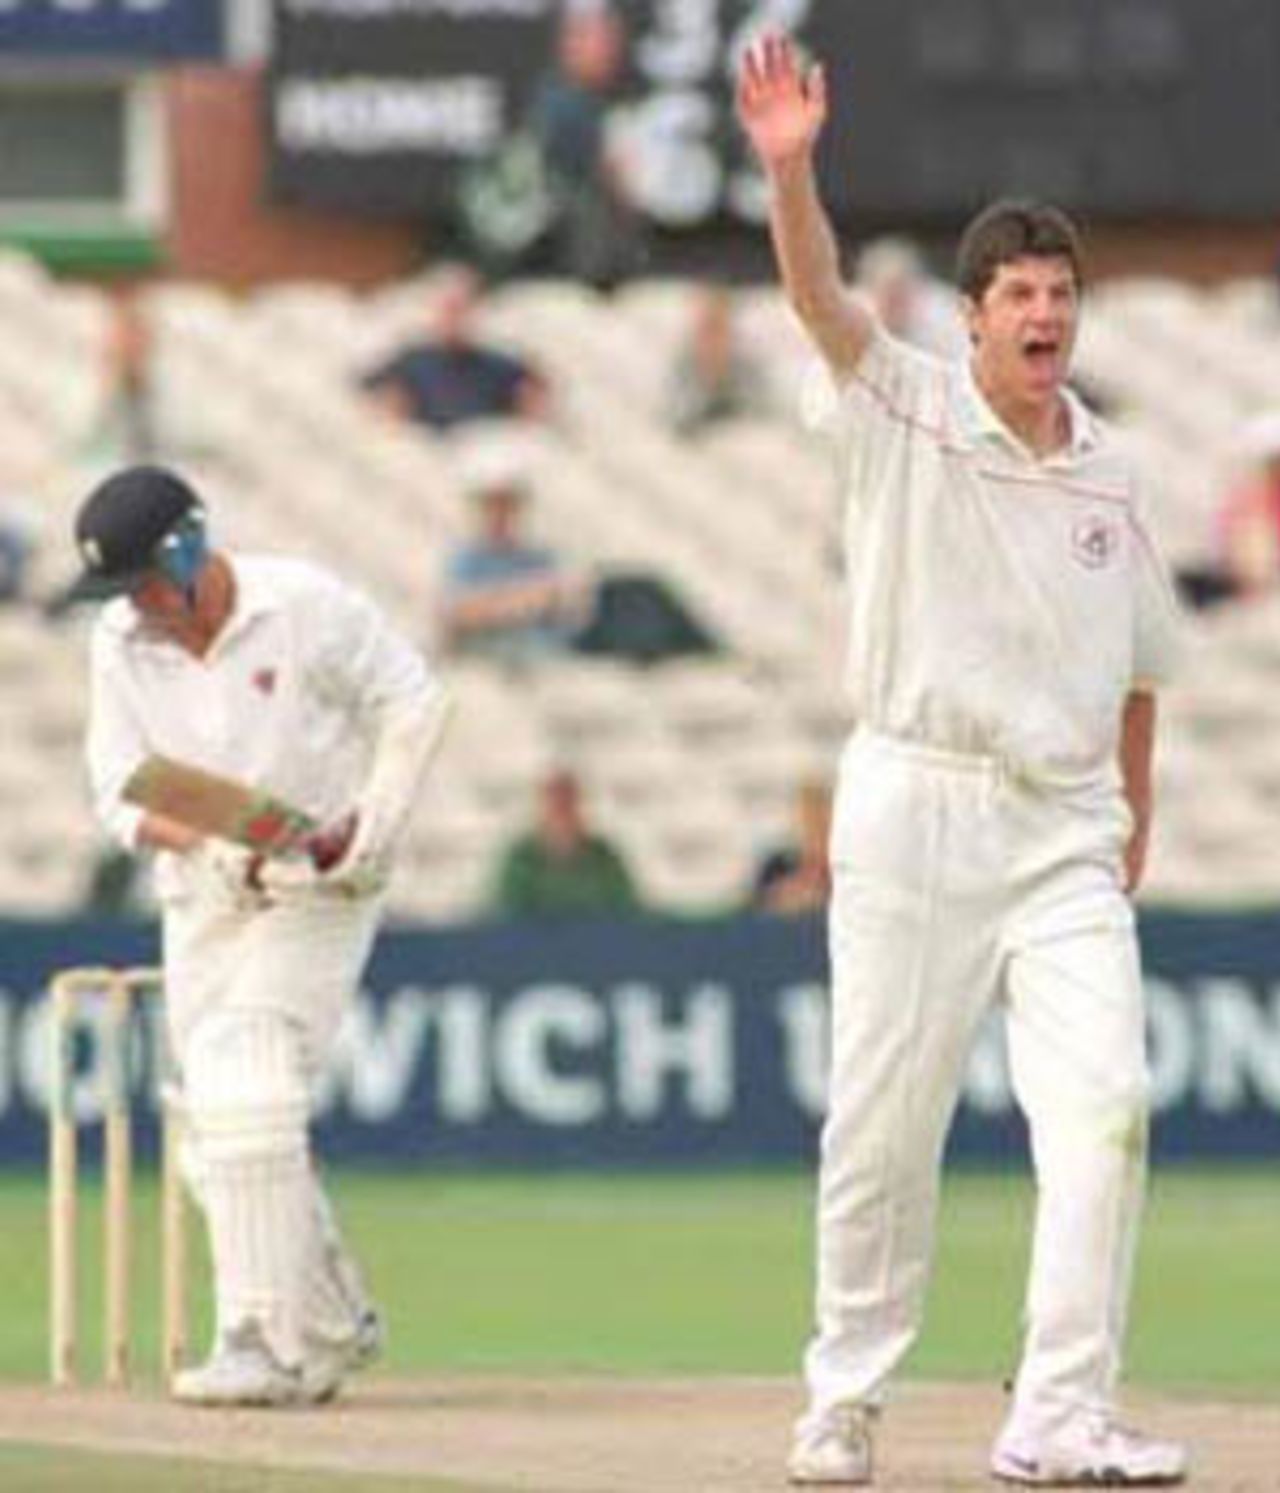 Mike Smethurst appeals for an LBW against Bowler, PPP healthcare County Championship Division One, 2000, Lancashire v Somerset, Old Trafford, Manchester, 08-10 September 2000 (Day 3).